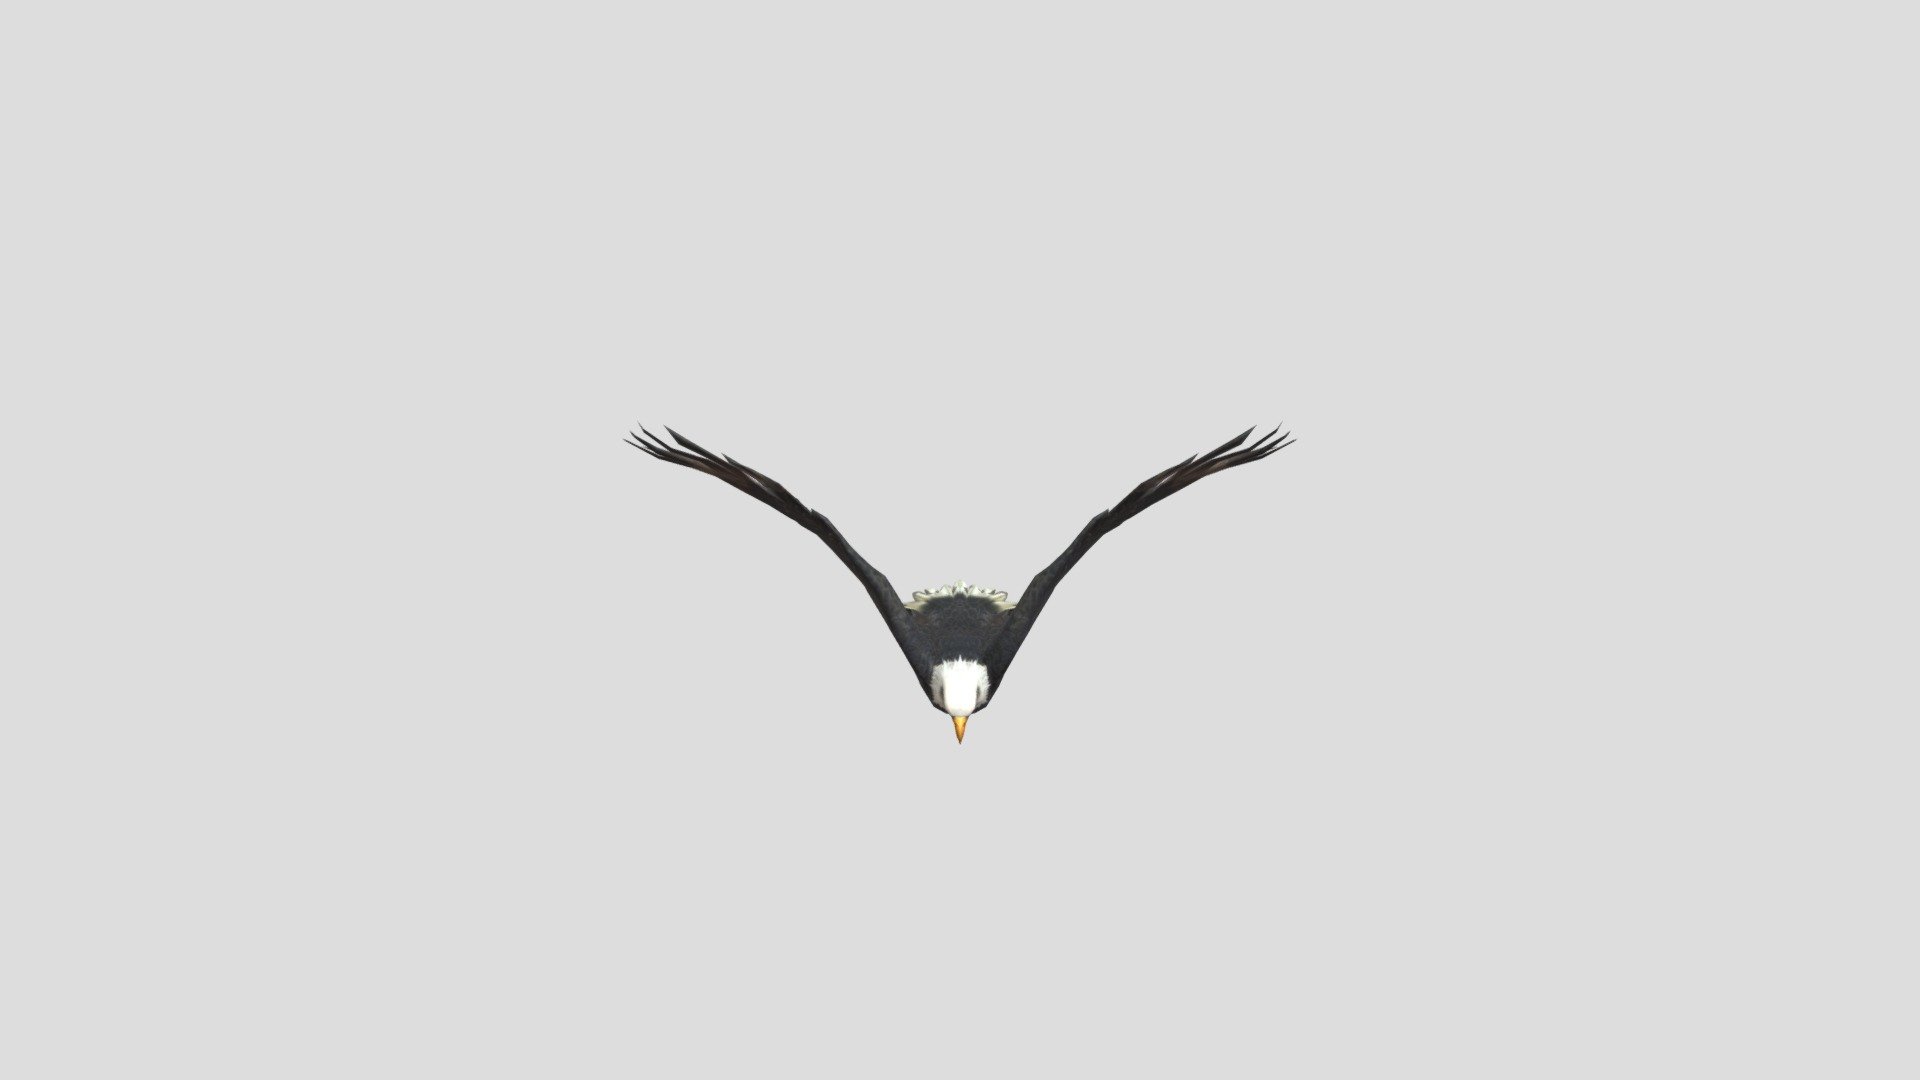 &ldquo;Animated Eagle https://skfb.ly/67yM7) by Asim3d is licensed under Creative Commons Attribution (http://creativecommons.org/licenses/by/4.0/) 3d model